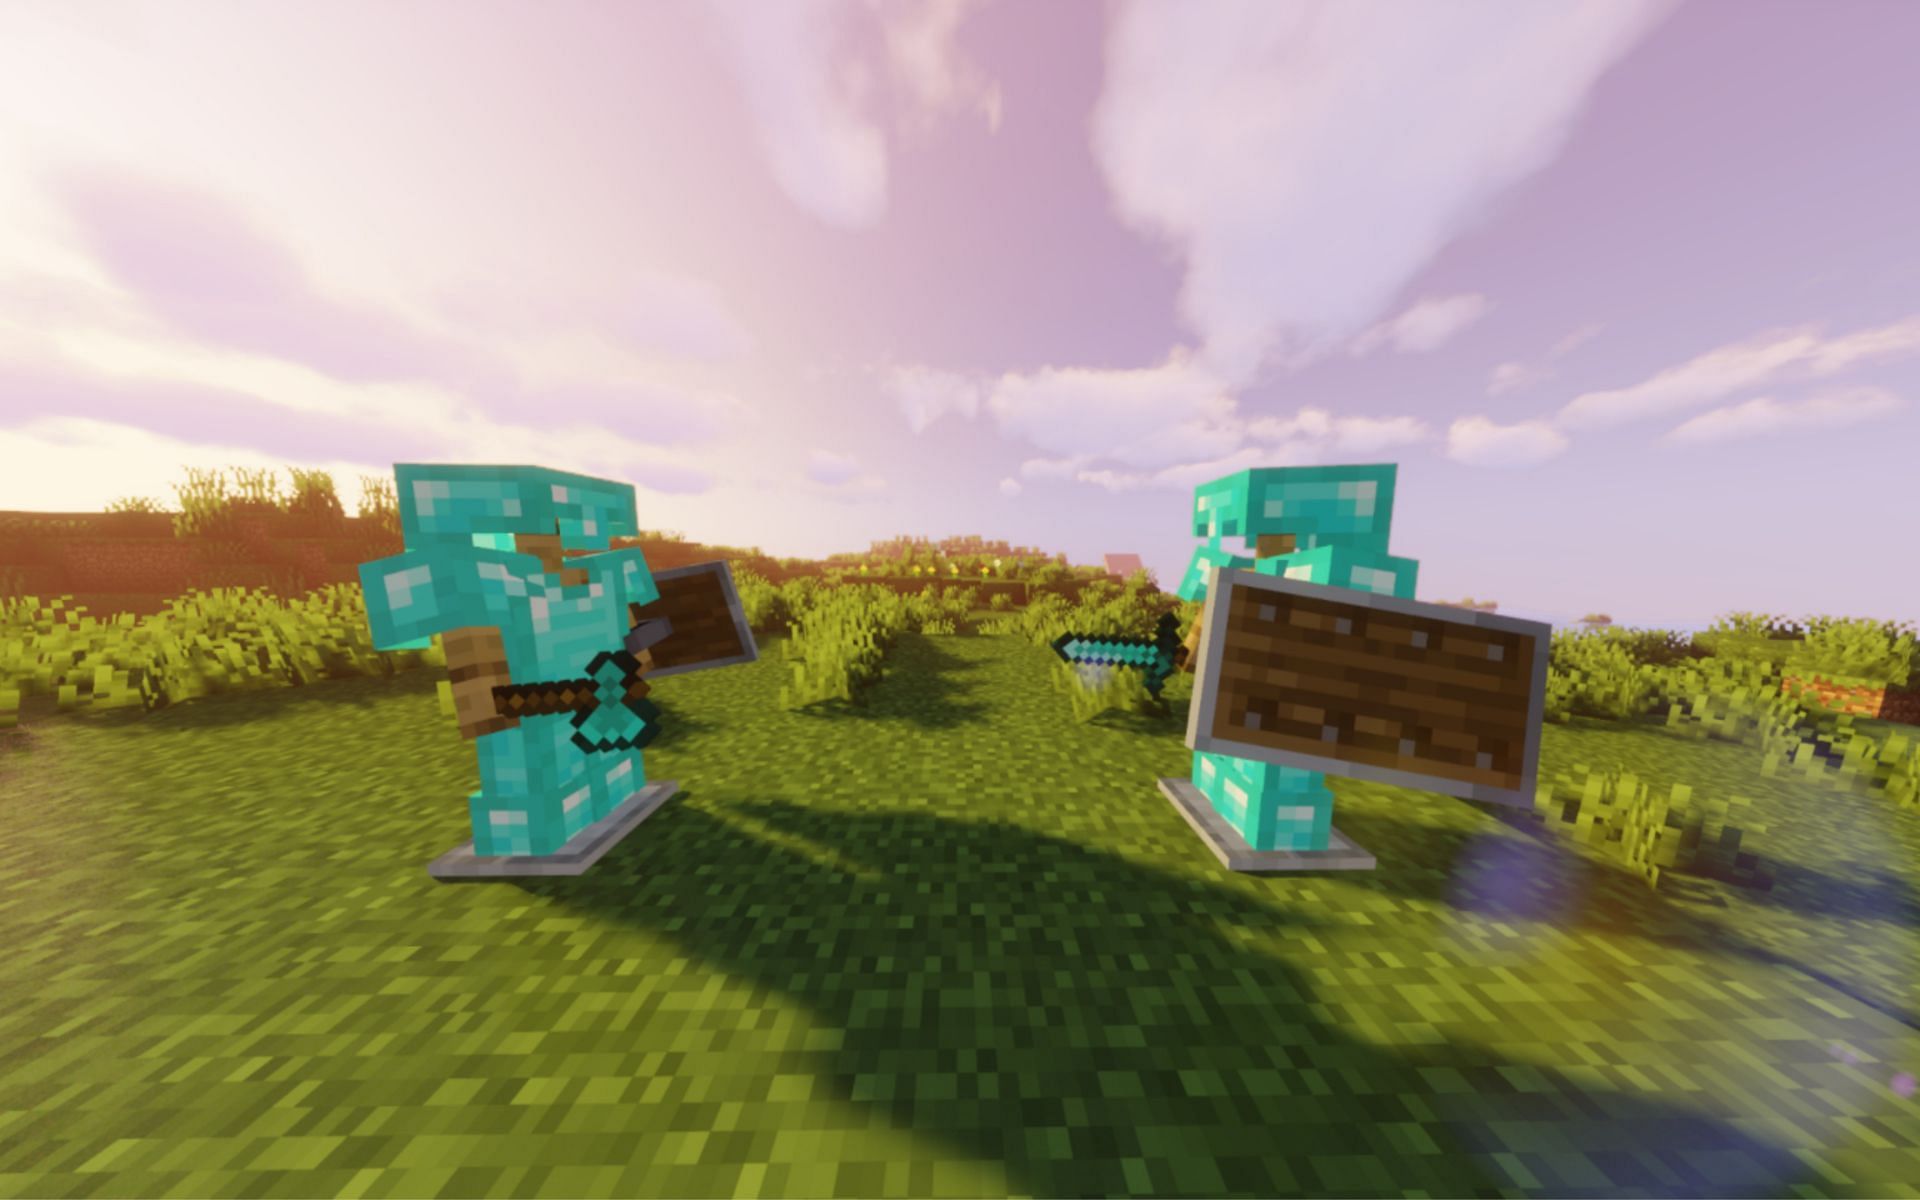 PVP is a common activity on online servers (Image via Minecraft)